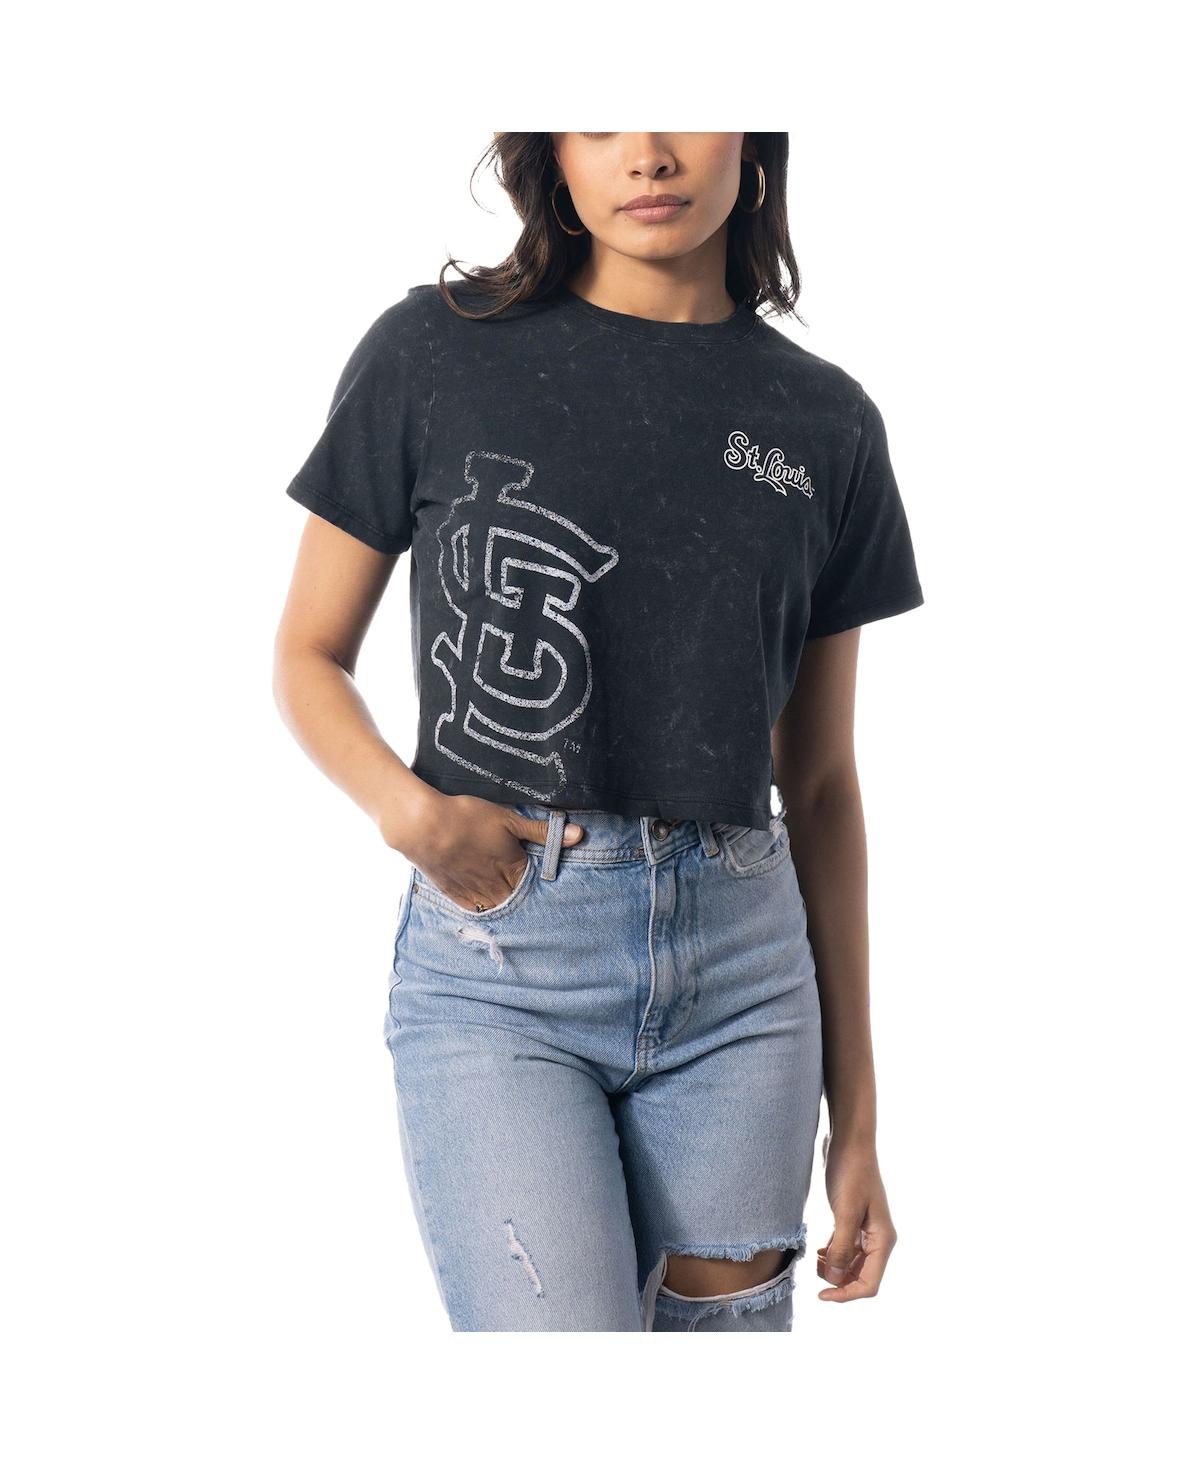 Women's The Wild Collective Black St. Louis Cardinals Cropped T-shirt - Black